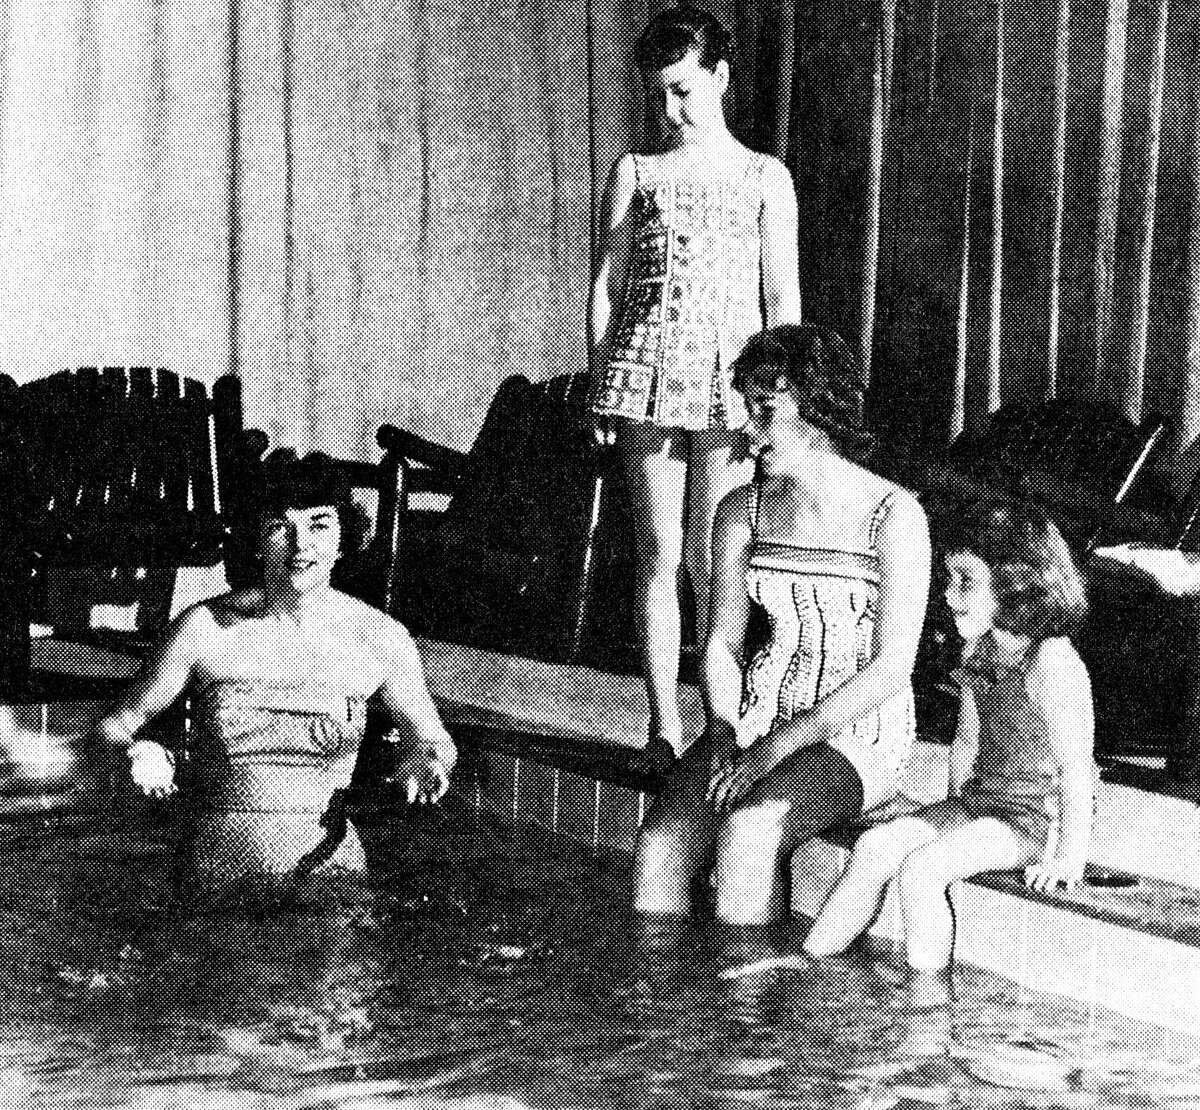 "Swim-testing" new Bill Atkinson swimwear and at the same time modeling for forthcoming publicity on the Glen of Michigan line are four models enjoying their work at the newly completed Hotel Chippewa swimming pool. Among the first people to take the plunge in suits created by well-known Glen ,of Michigan, designer was Pat Cummings, Atkinson's assistant (standing left) in the pool. Local models considering a dip are Cindy Freed (standing); Mary Ann Anderson and Susie Howe. The photo was published in the News Advocate on Dec. 31, 1962.